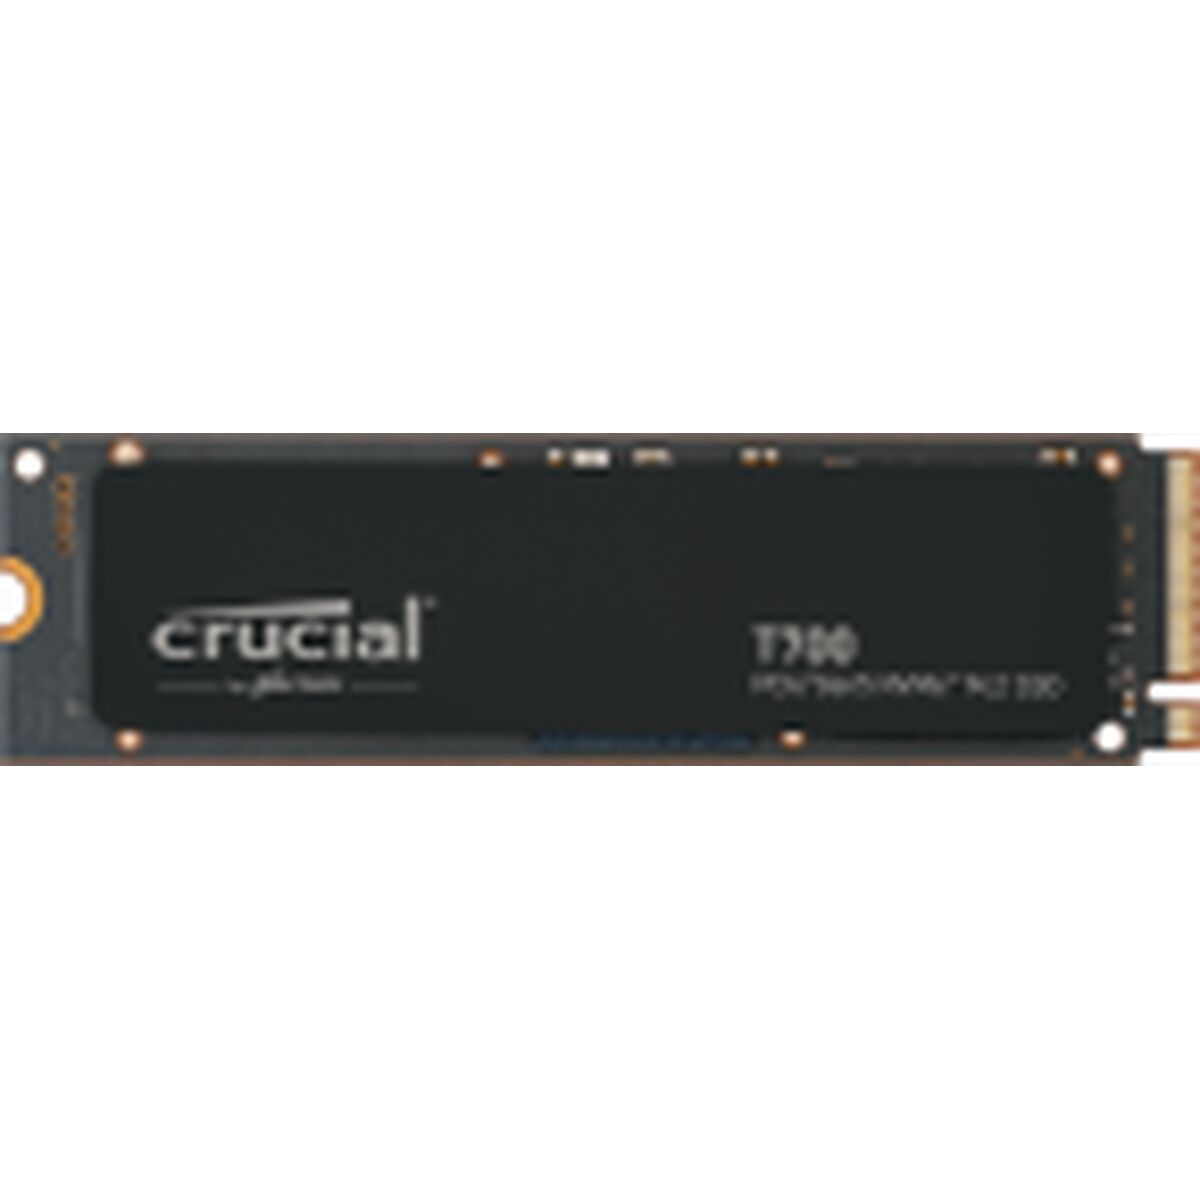 Hard Drive Crucial T700  1 TB SSD, Crucial, Computing, Data storage, hard-drive-crucial-t700-1-tb-ssd, Brand_Crucial, category-reference-2609, category-reference-2803, category-reference-2806, category-reference-t-19685, category-reference-t-19909, category-reference-t-21357, category-reference-t-25638, computers / components, Condition_NEW, Price_300 - 400, Teleworking, RiotNook